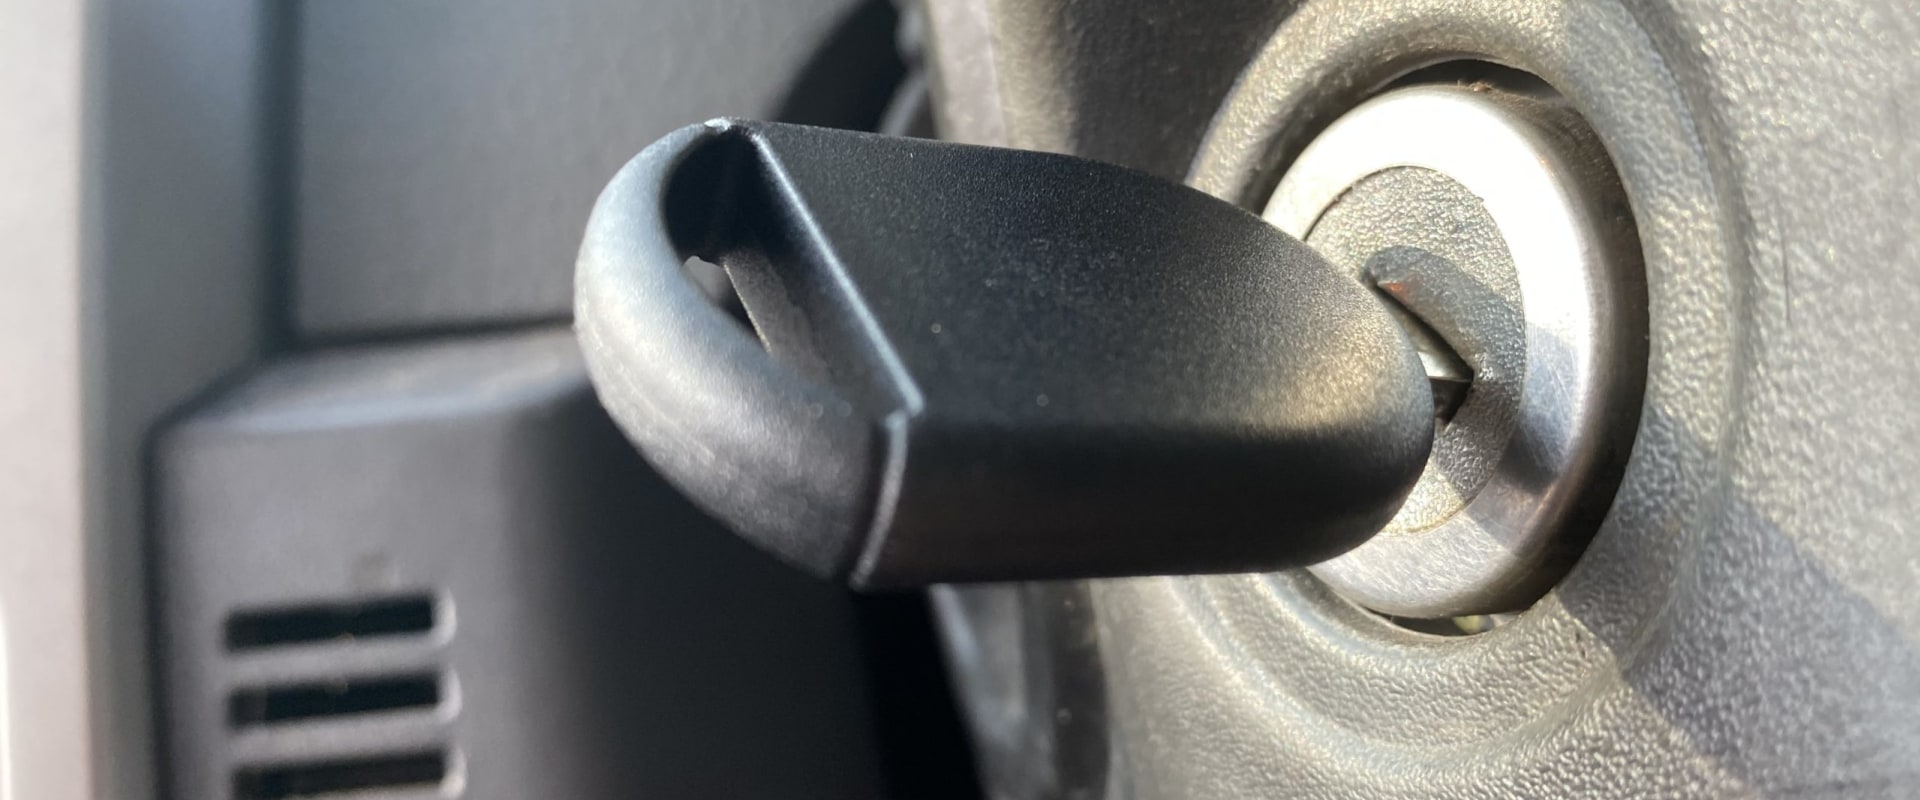 Everything You Need to Know About Trunk Lock Repair Services from a Car Locksmith in Spokane WA